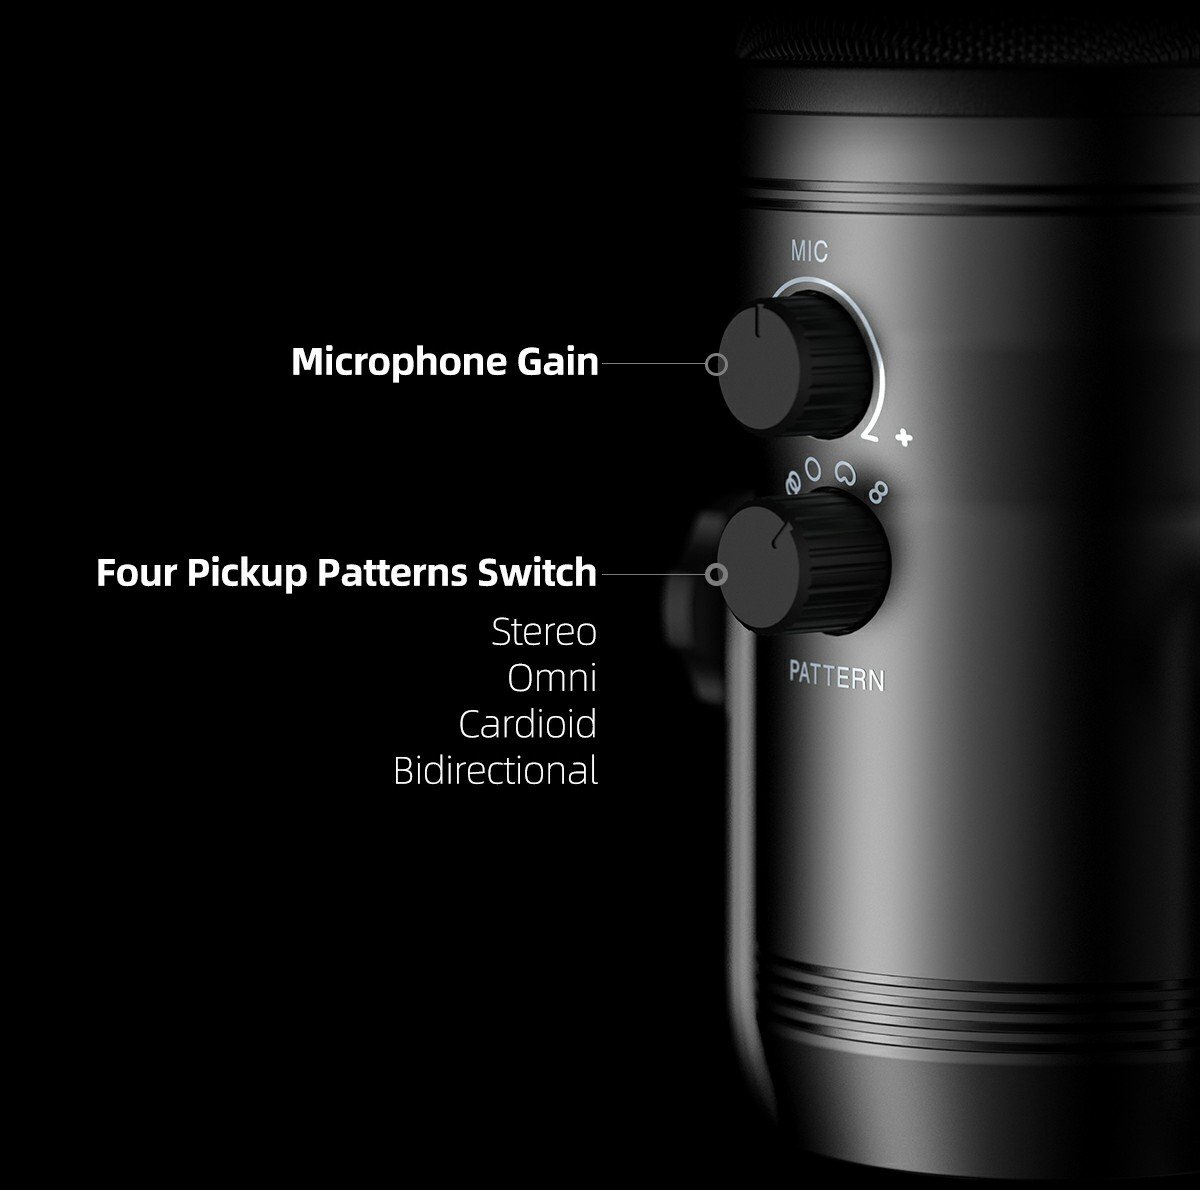 FIFINE K690 USB MIC WITH FOUR POLAR PATTERNS, GAIN DIALS, A LIVE MONITORING JACK & A MUTE BUTTON